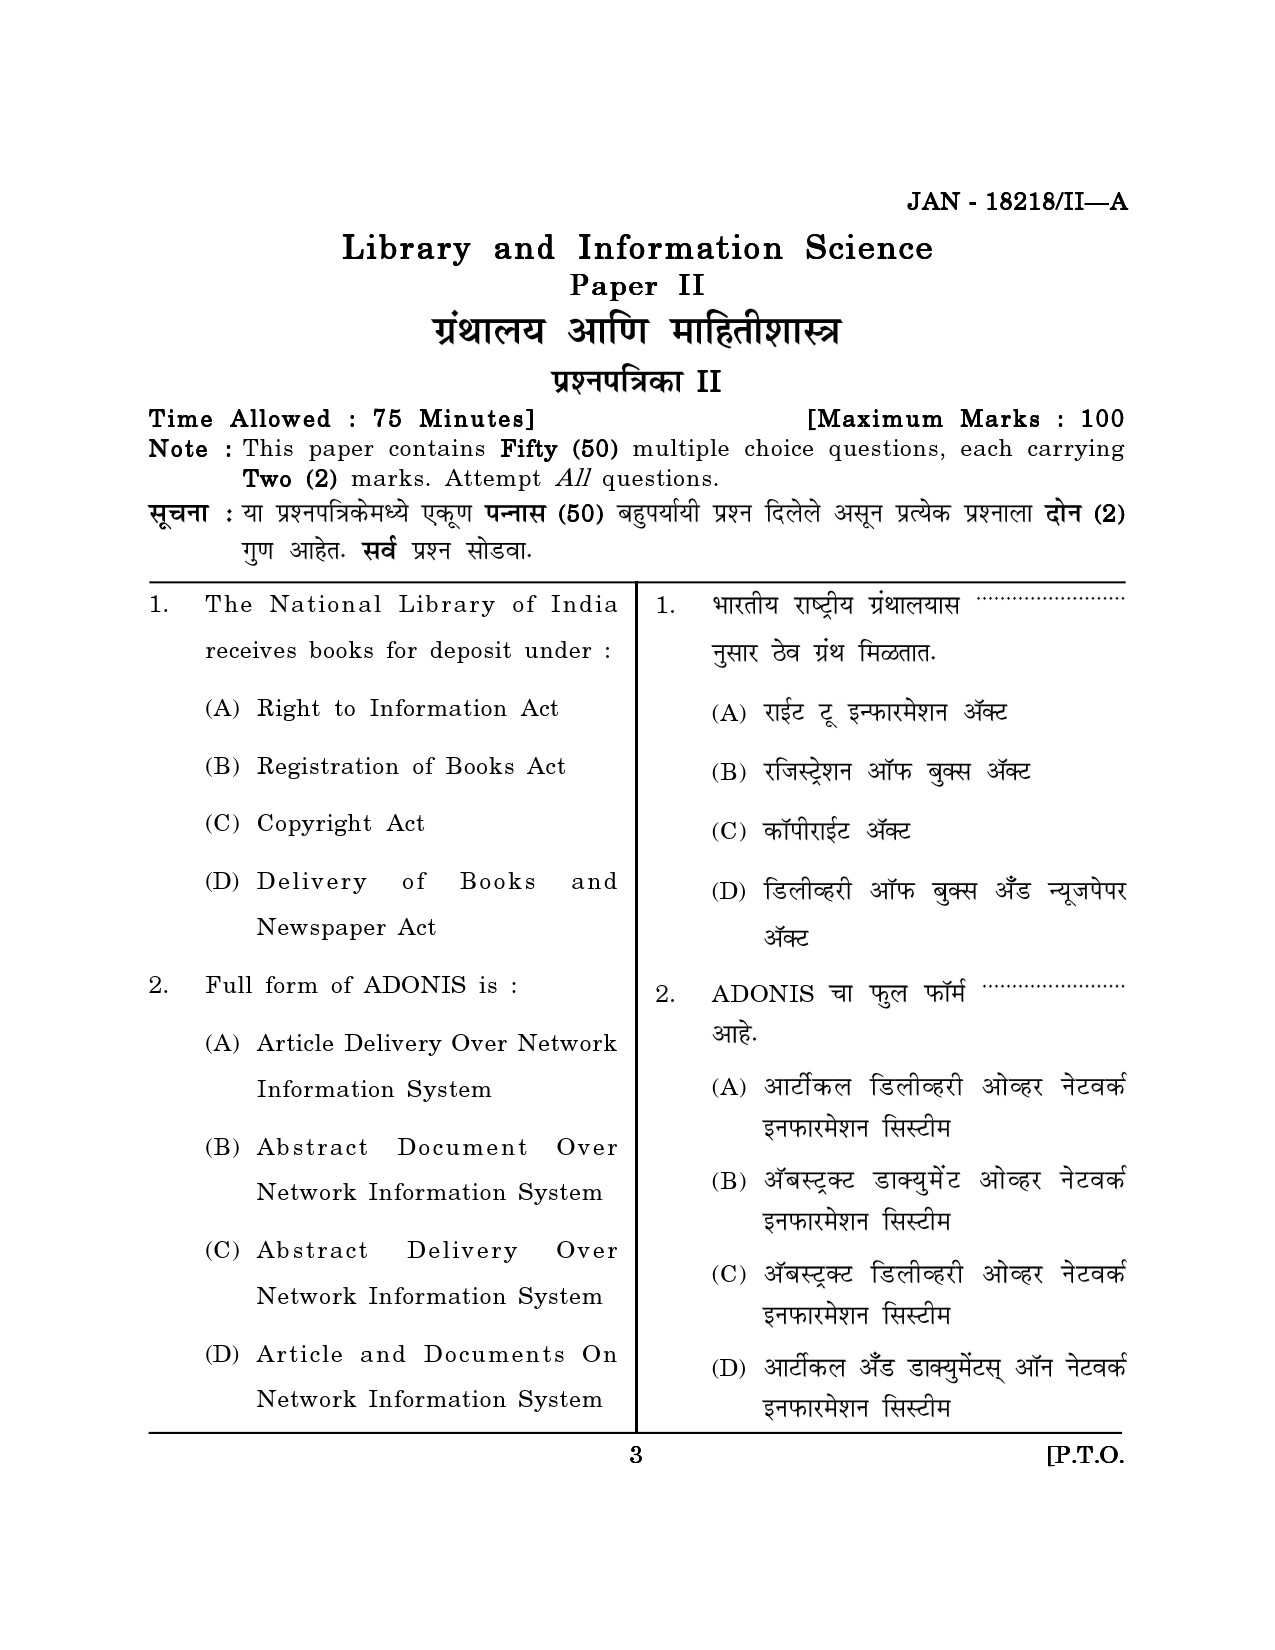 Maharashtra SET Library Information Science Question Paper II January 2018 2